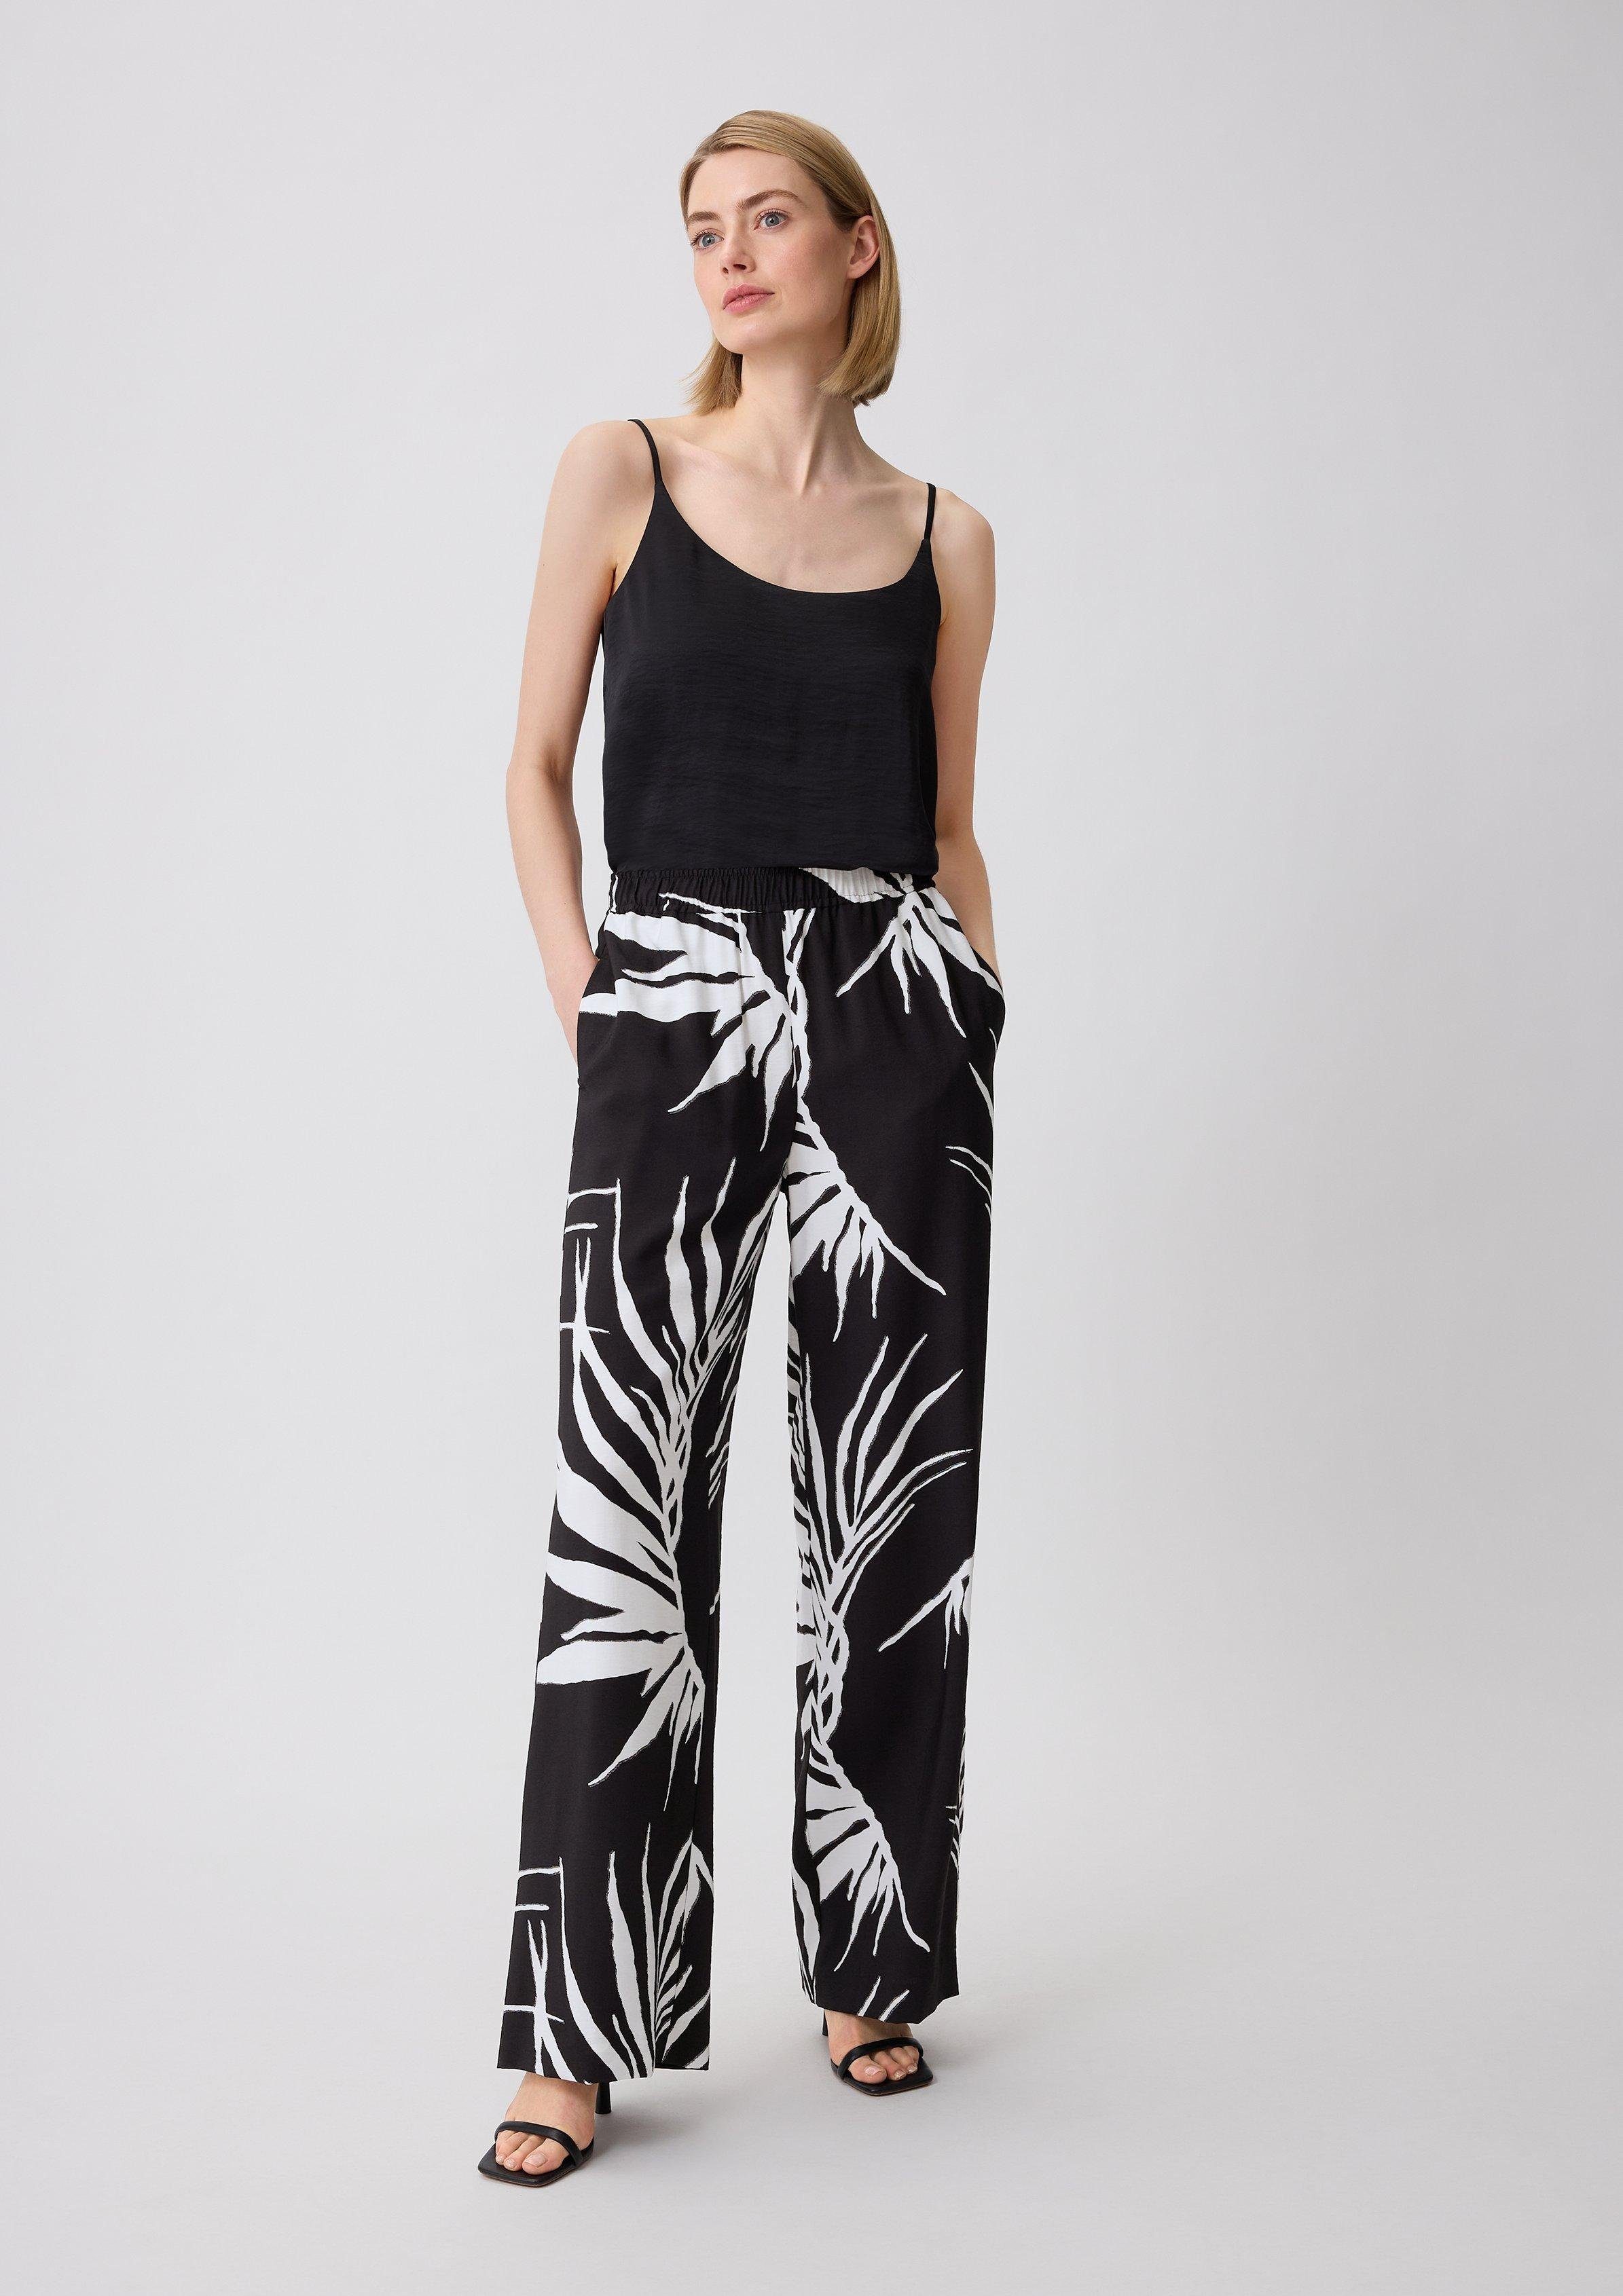 Comma Stoffhose Relaxed: Hose mit All-over-Print schwarz